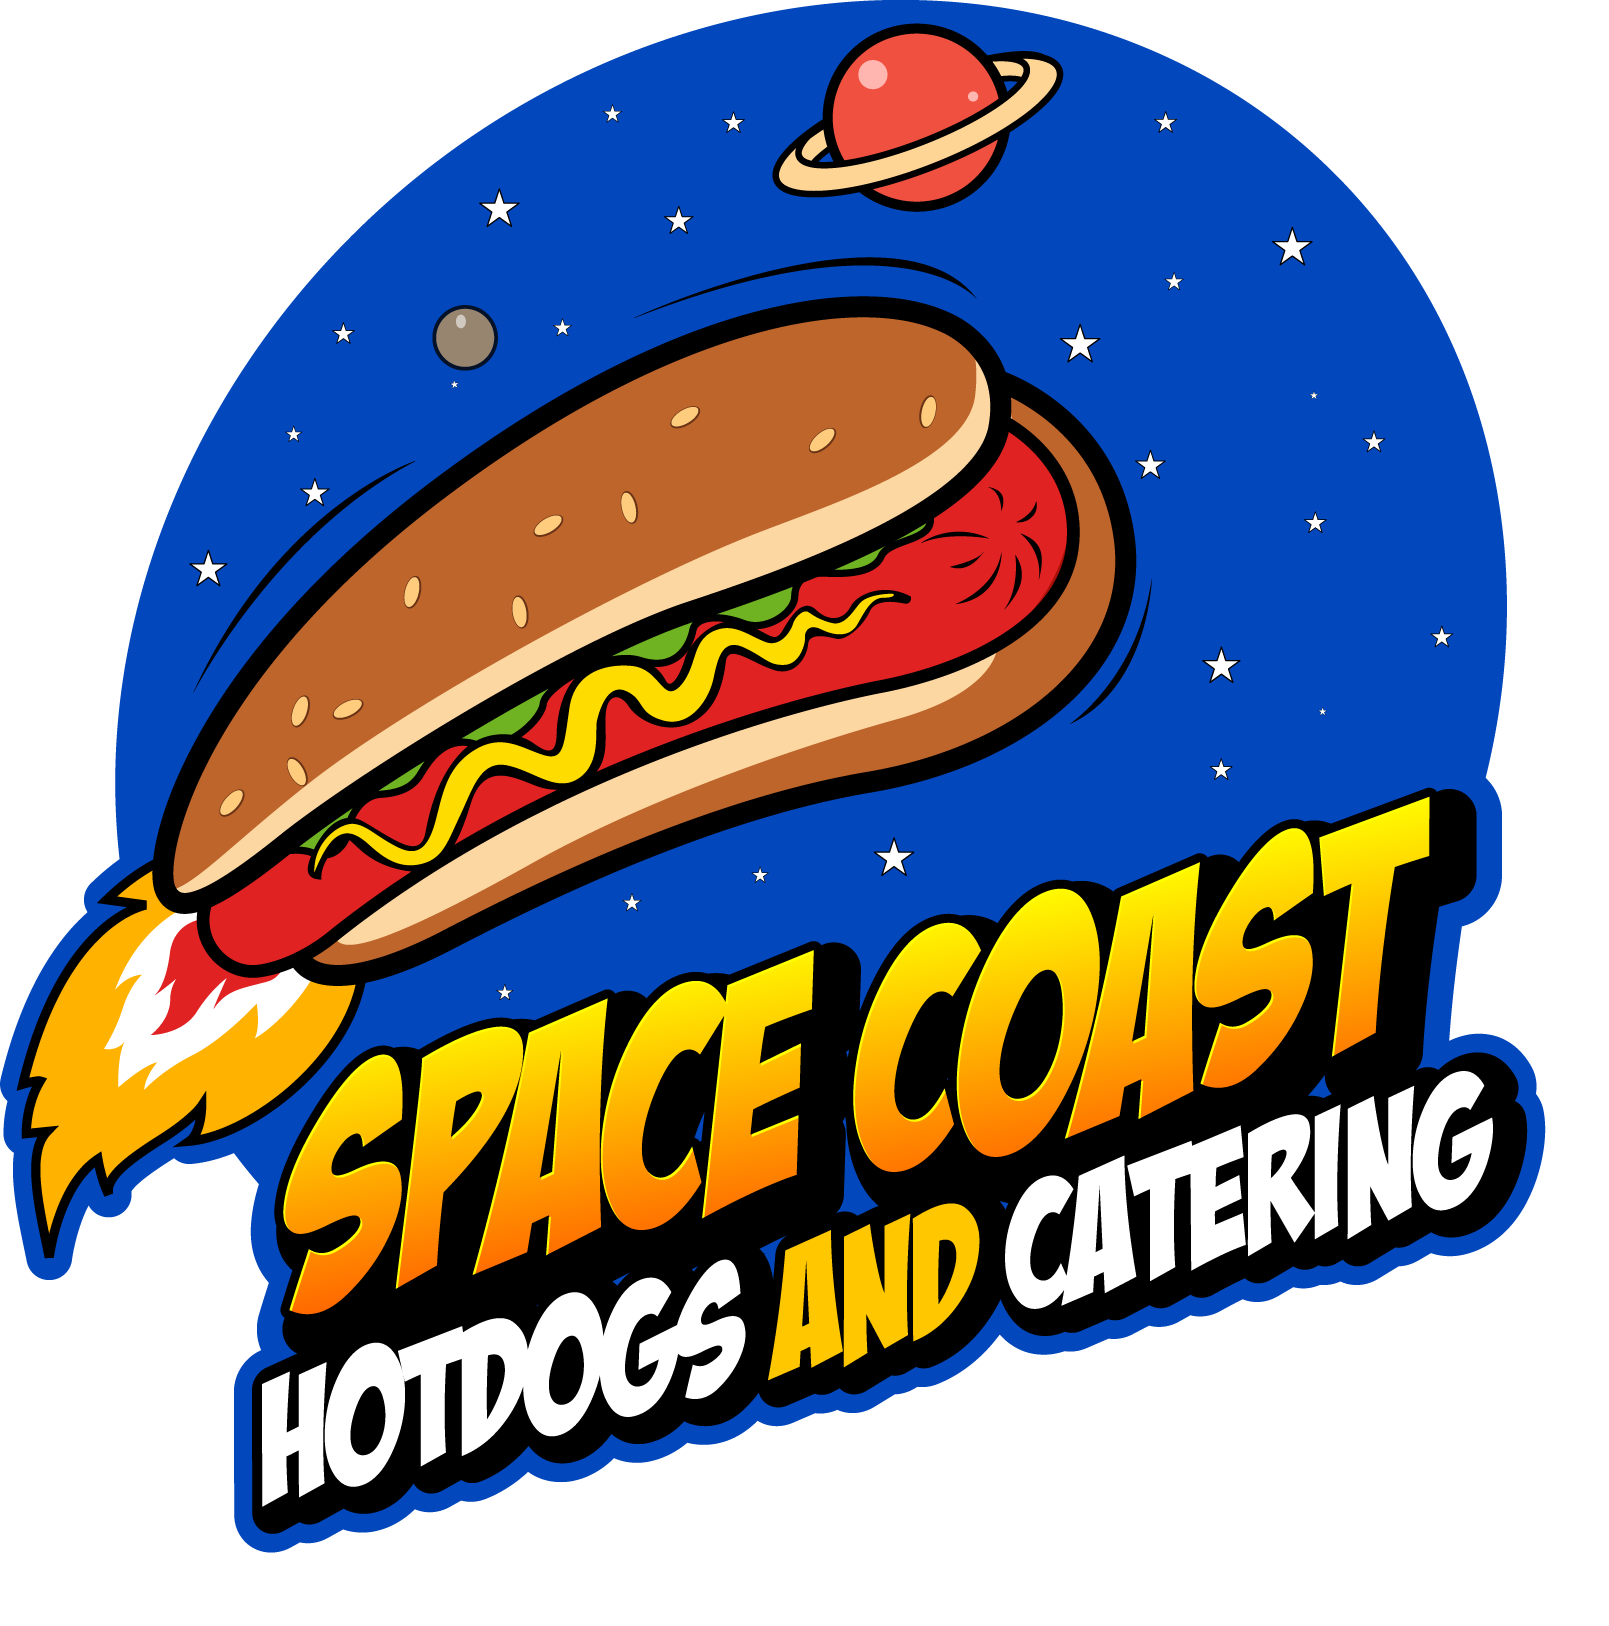 Contact Us Space Coast Hotdogs and Catering LLC.